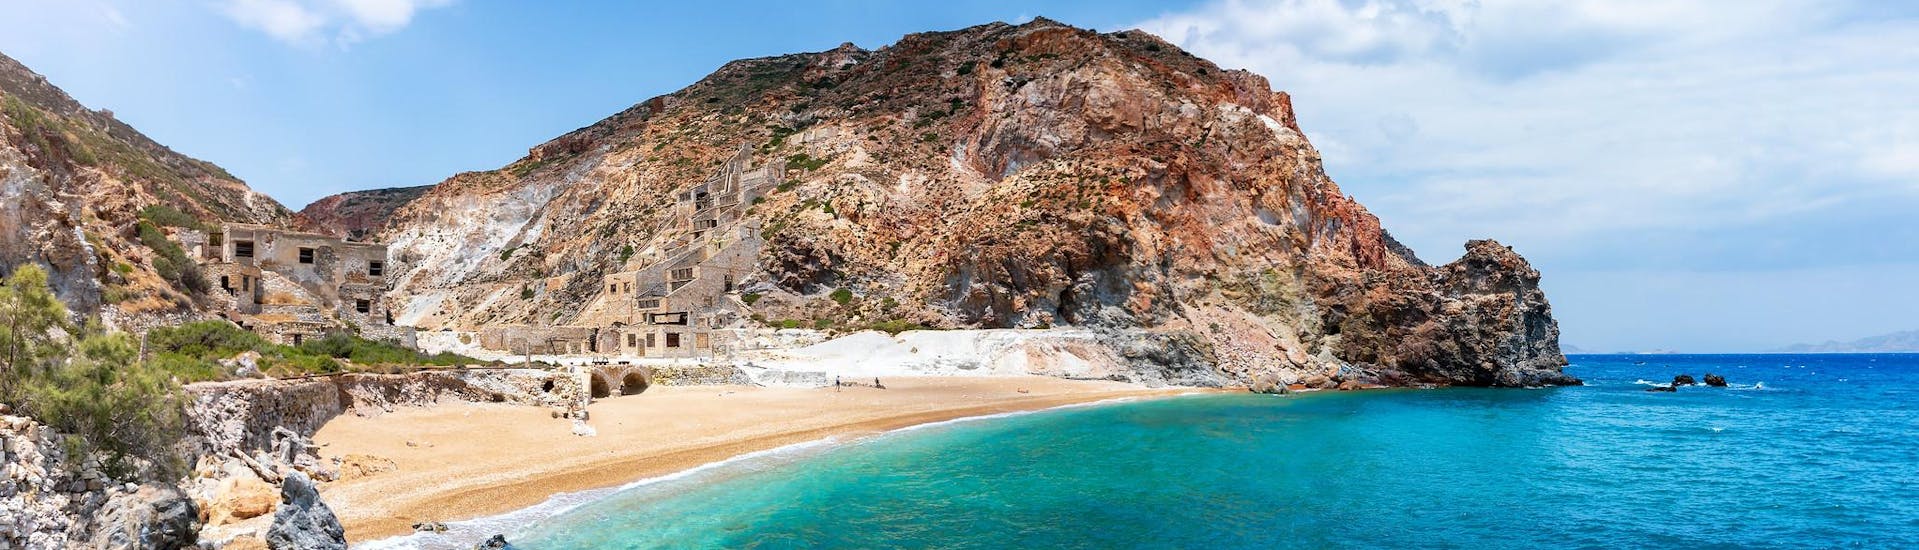 The remote beach of Thiorichia on the island of Milos, which you can visit with a boat trip.